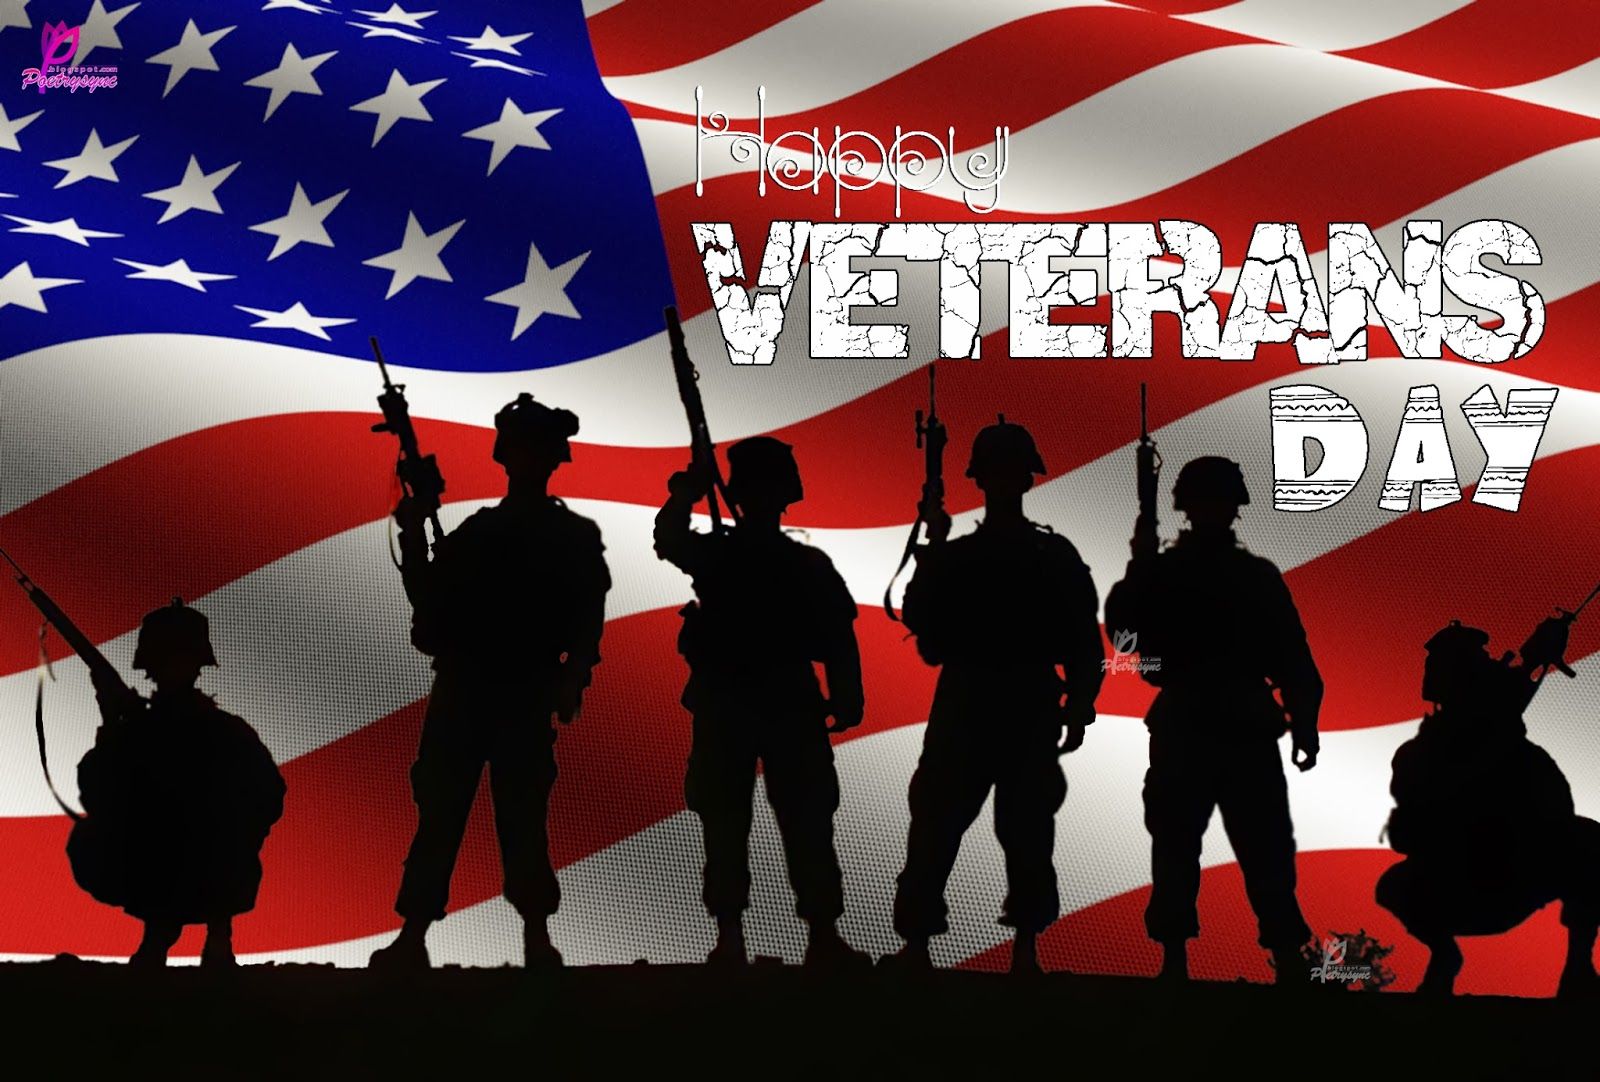 Veterans Day Wall Paper Wallpapers